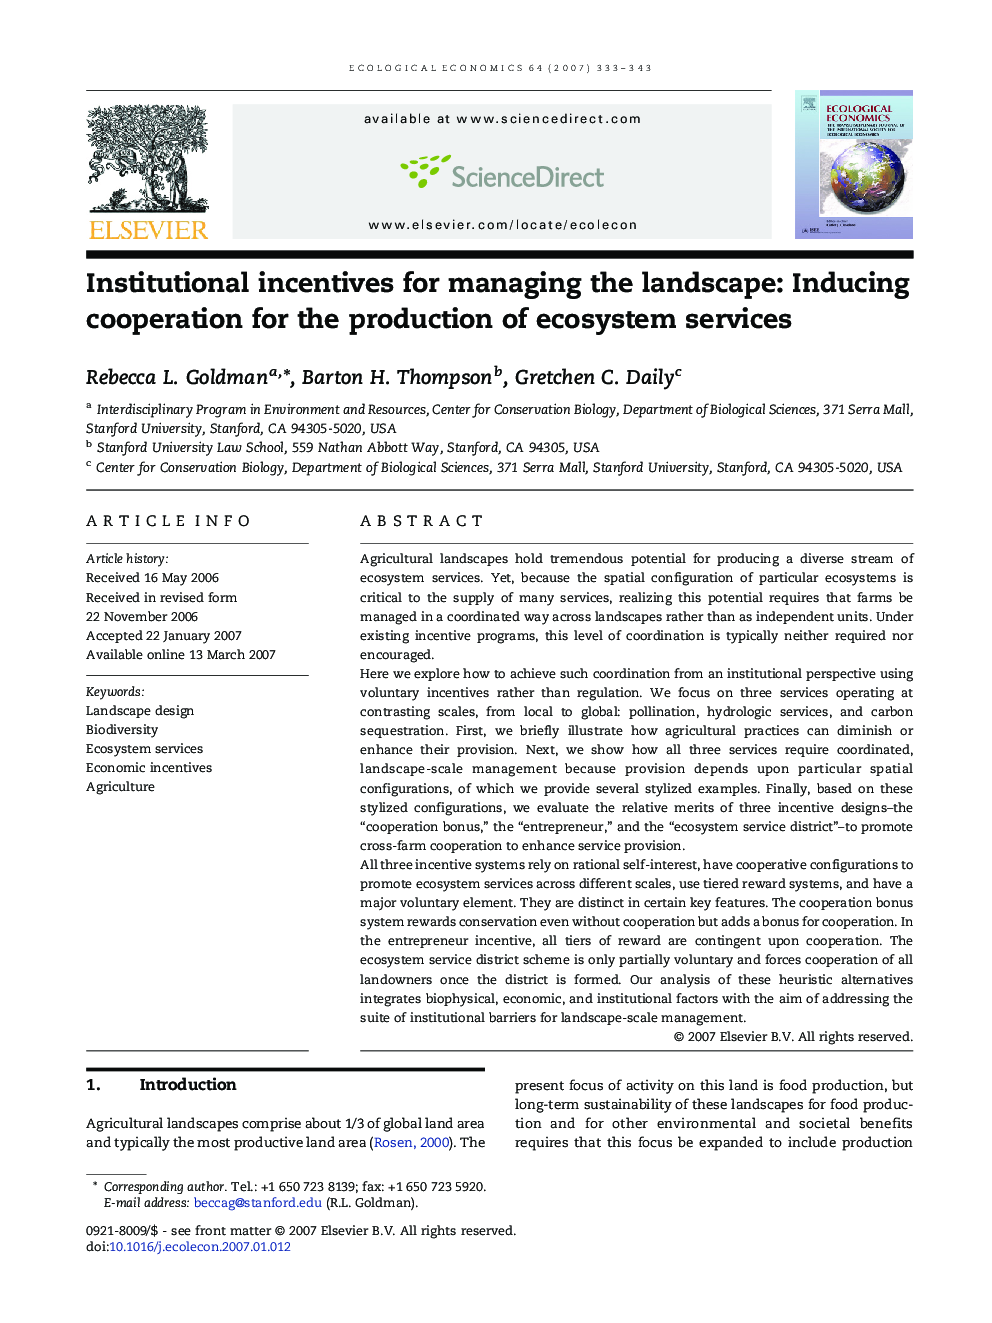 Institutional incentives for managing the landscape: Inducing cooperation for the production of ecosystem services